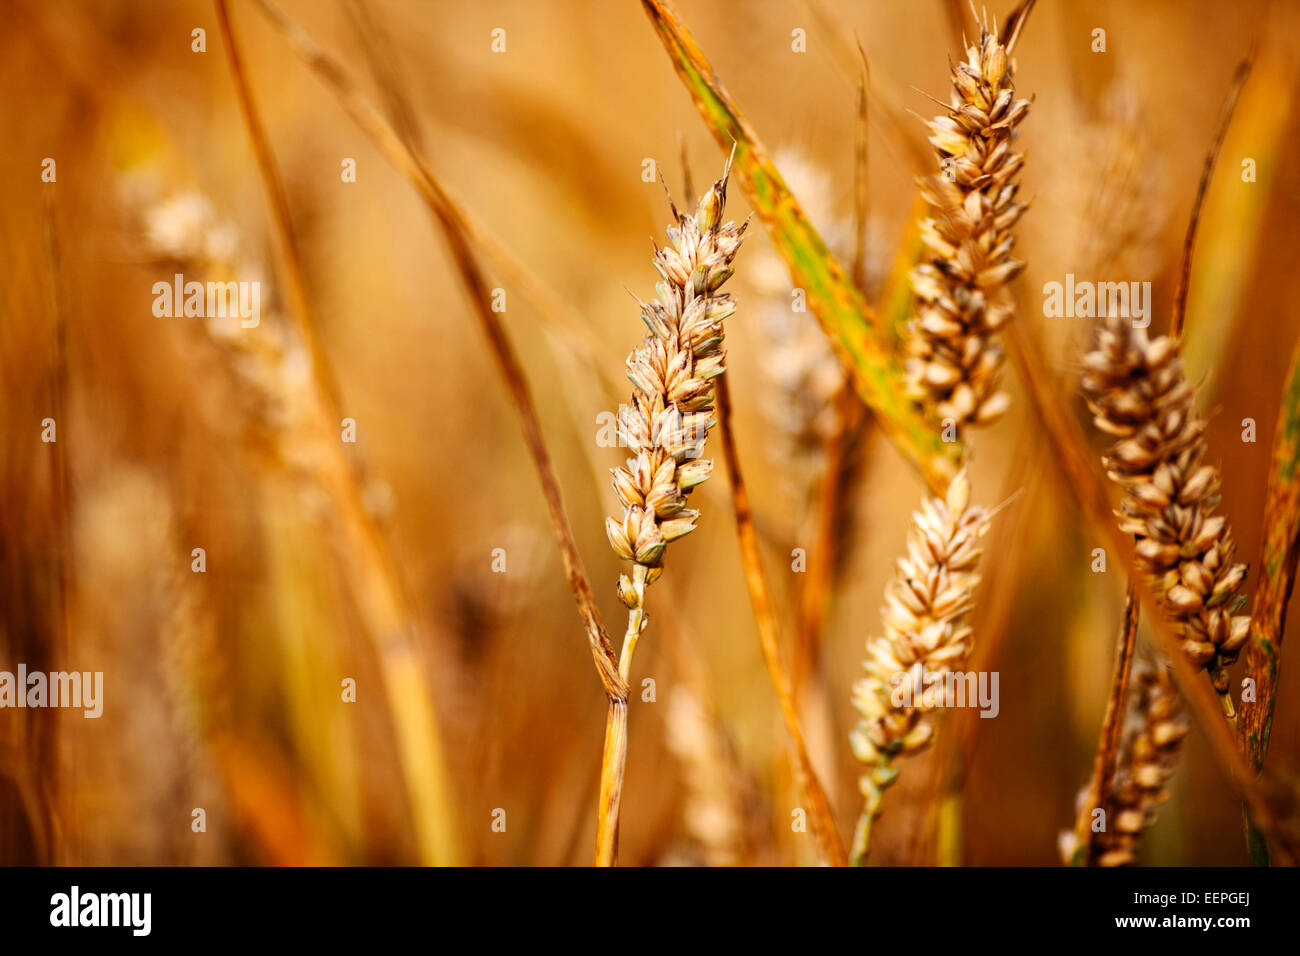 wheat growing in a field in northern ireland Stock Photo